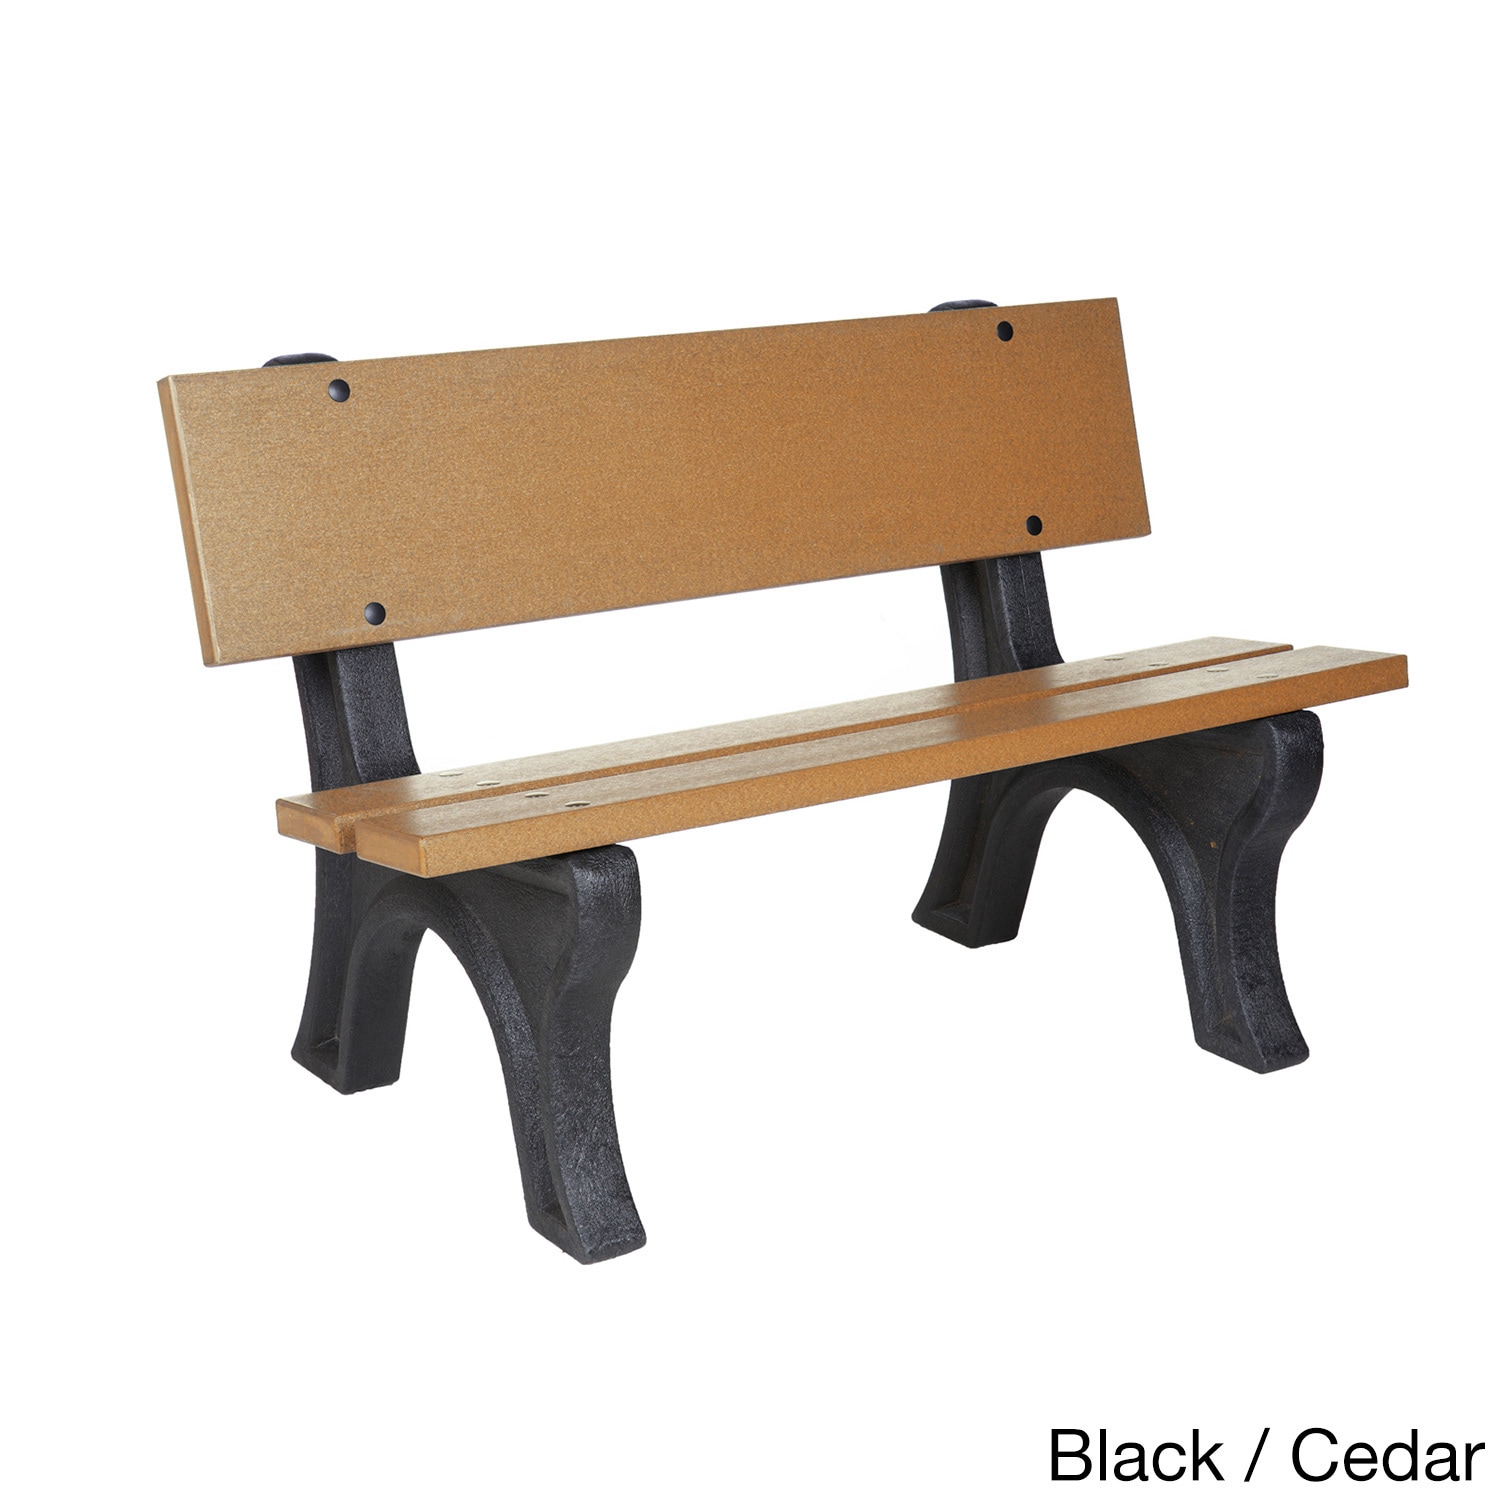 4 foot Depot Park Bench (Black/brown, black/cedar, black/green, black/driftwood, brown/cedarMaterials Recycled high density polyethyleneWeather resistantWeight capacity 300 poundsDimensions 27 inches high x 48 inches wide x 21 inches longWeight 73 pou